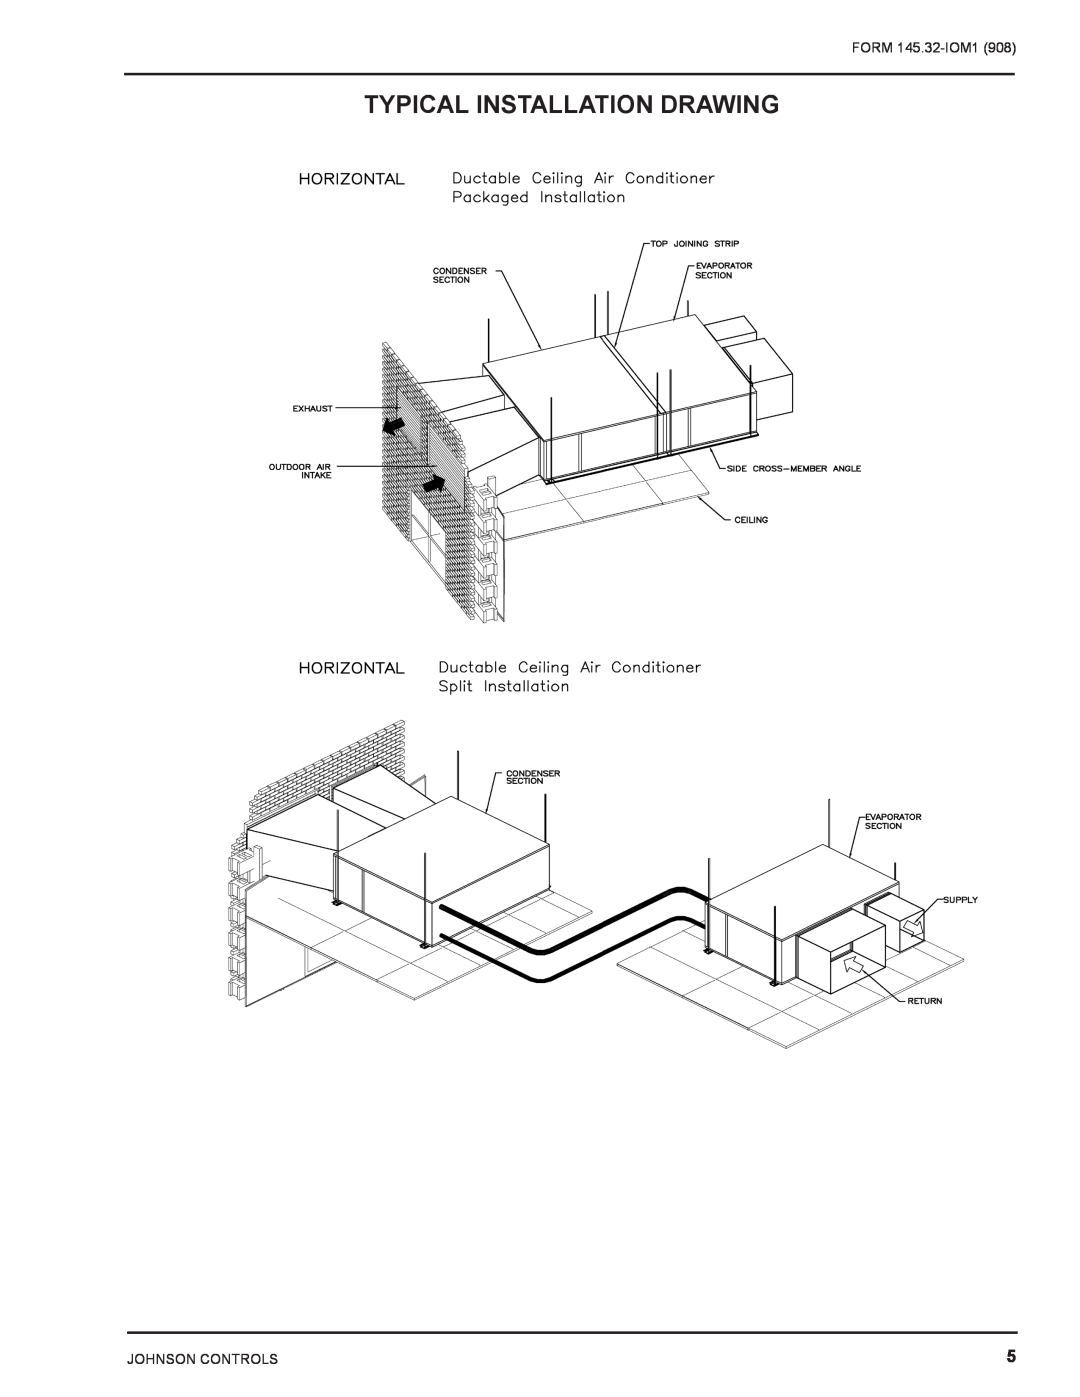 Energy Tech Laboratories DSH installation instructions Typical Installation Drawing, FORM 145.32-IOM1908, Johnson Controls 